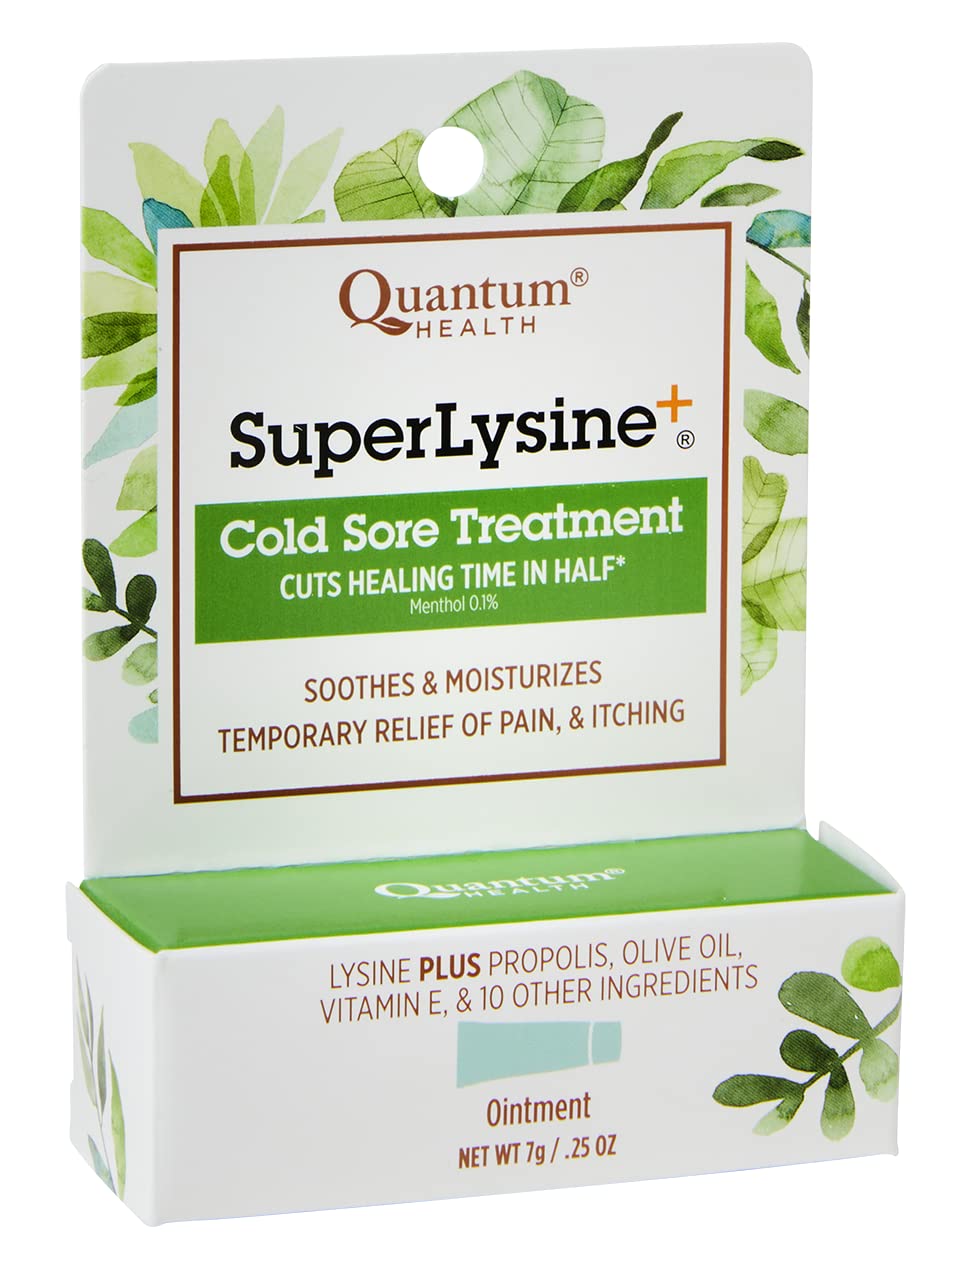 Quantum SuperLysine+ Cold Sore Treatment Ointment|Relieves Pain, Burning, and Itching|Cuts Healing Time in Half|0.25 Ounce